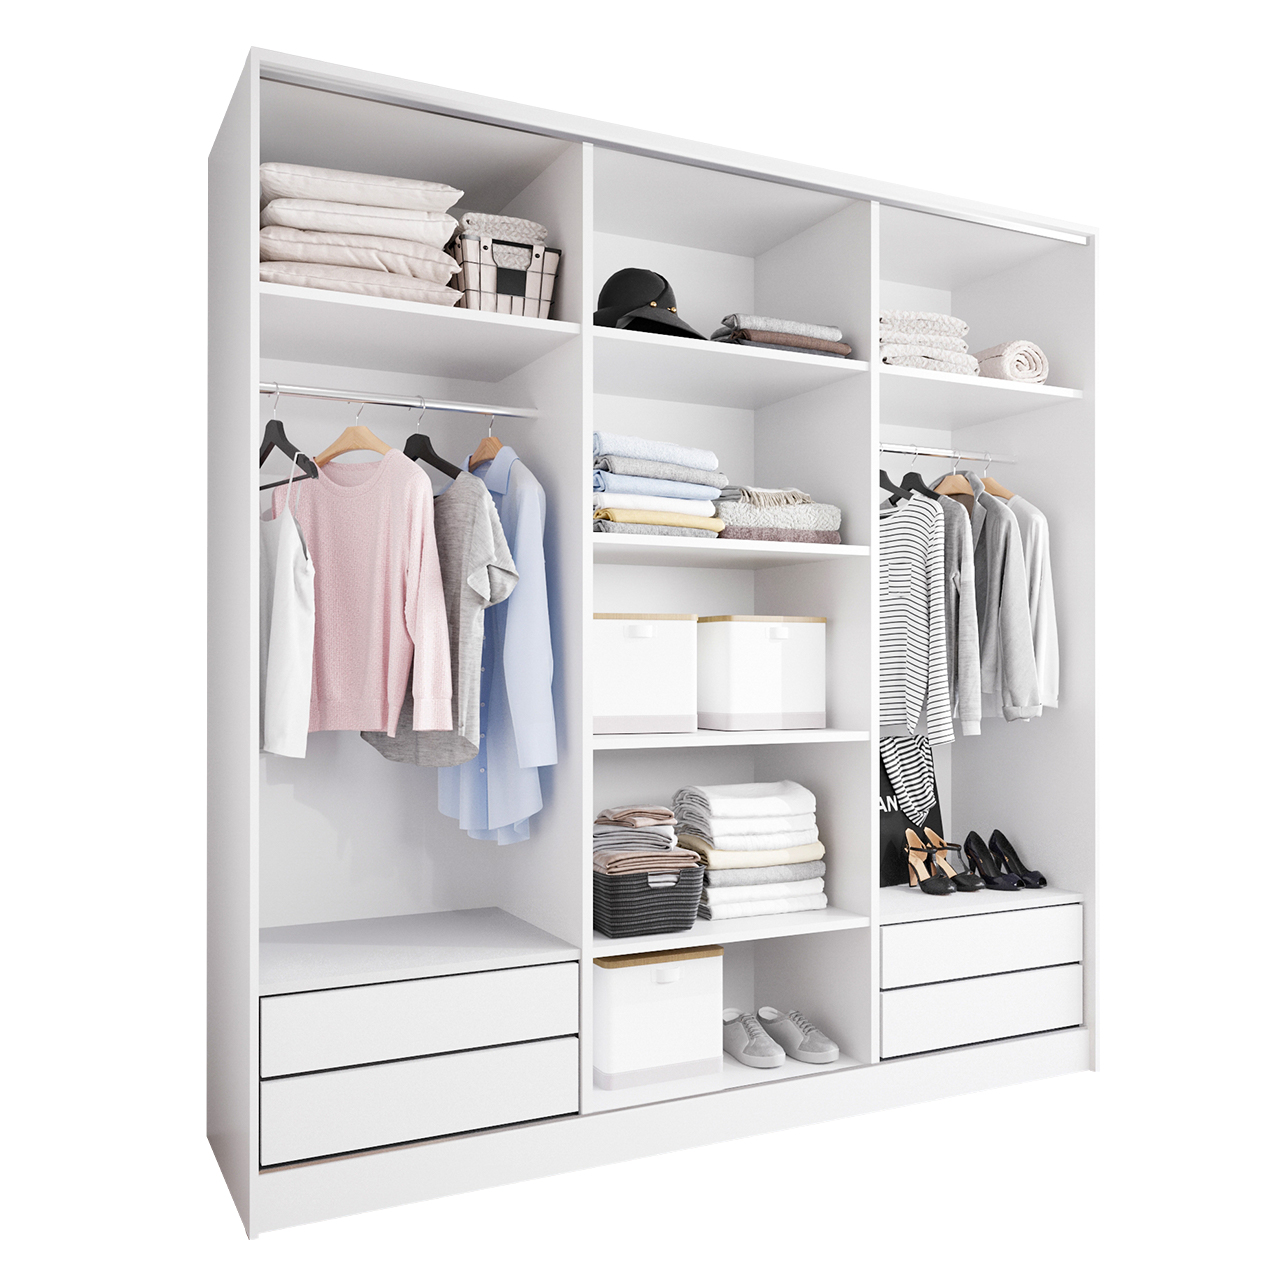 Sliding Wardrobe with Mirror and Drawers GRANO D 200 white